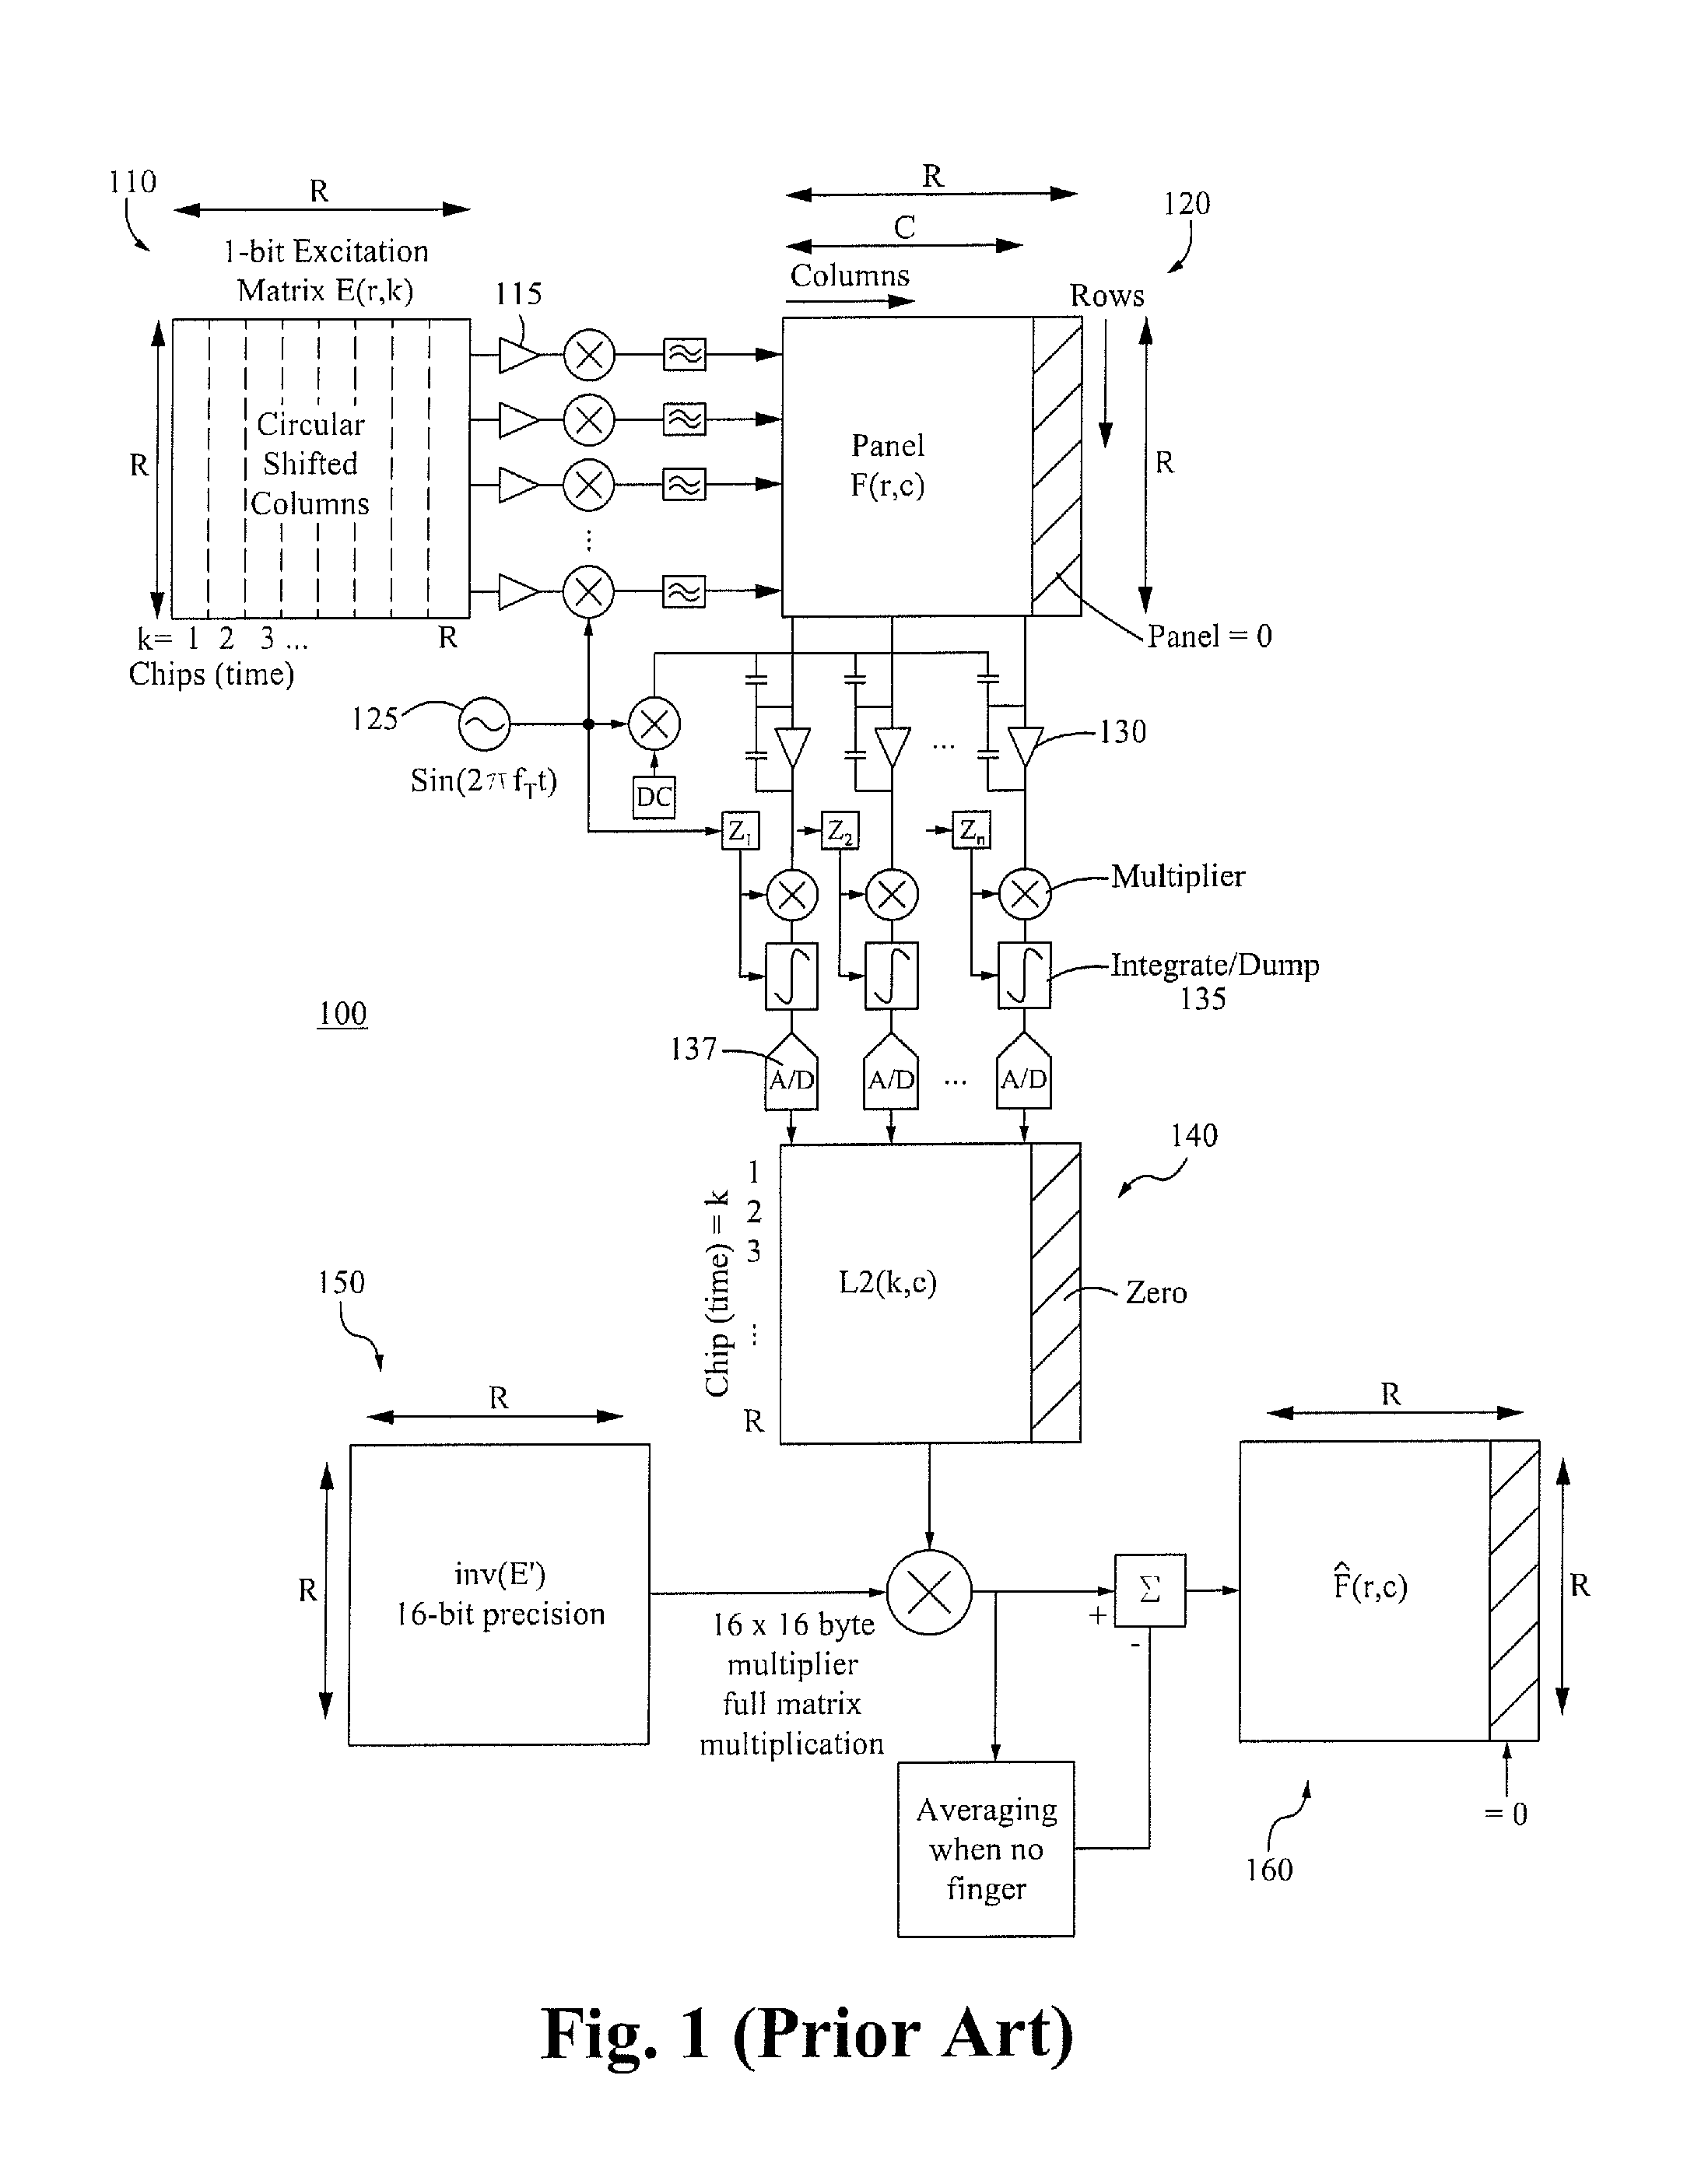 Digital filtering and spread spectrum based interference mitigation for mutual and self capacitance panel